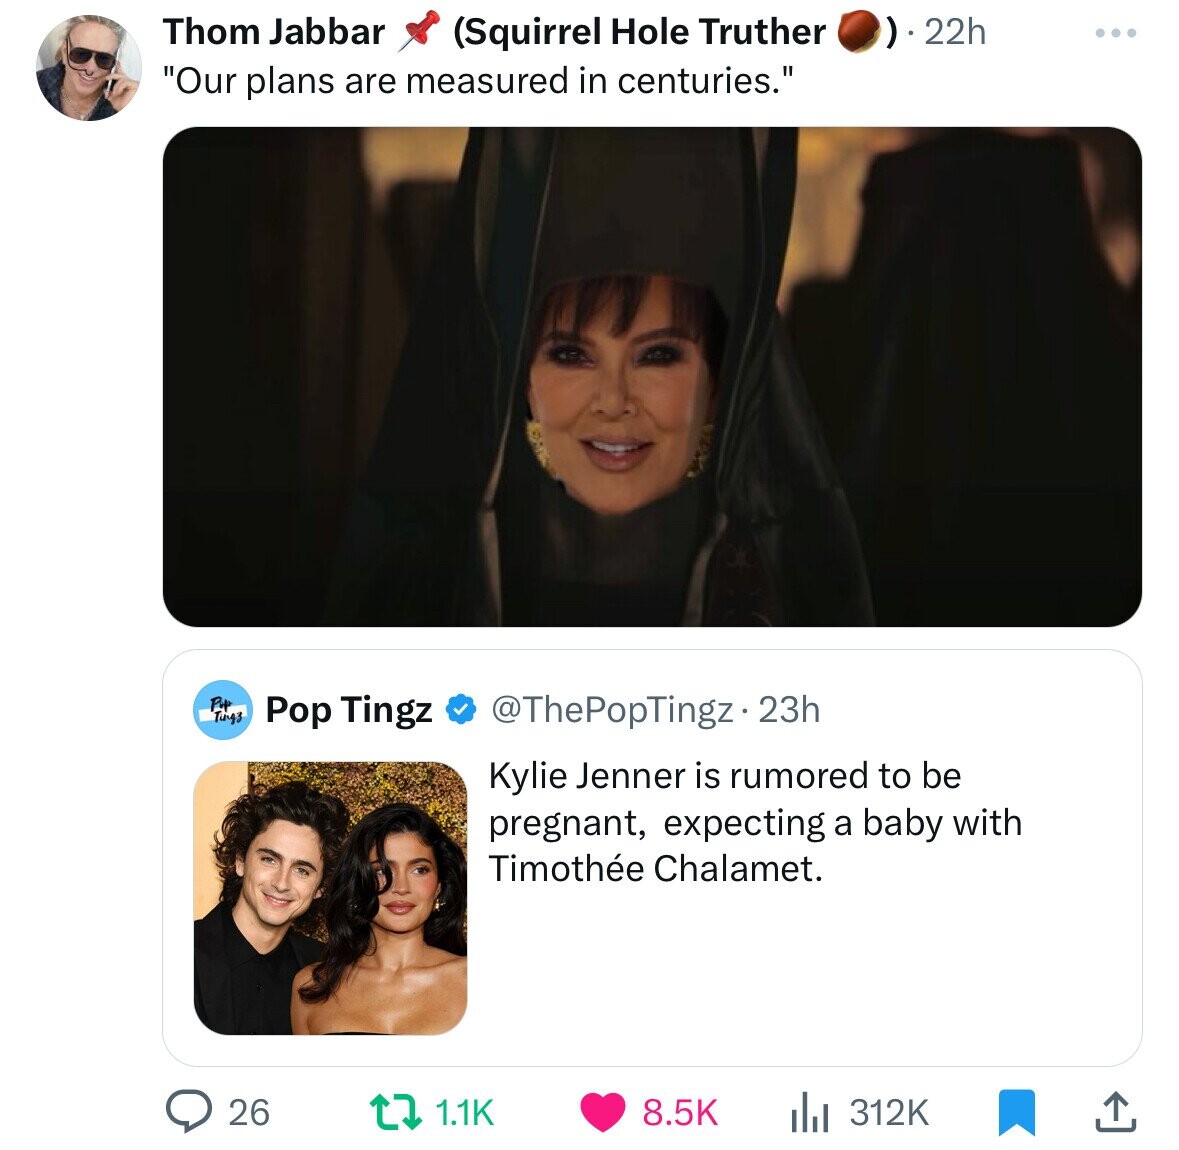 photo caption - Thom Jabbar Squirrel Hole Truther "Our plans are measured in centuries." Pop Ting3 22h Pop Tingz . 23h Kylie Jenner is rumored to be pregnant, expecting a baby with Timothe Chalamet. 26 tz l